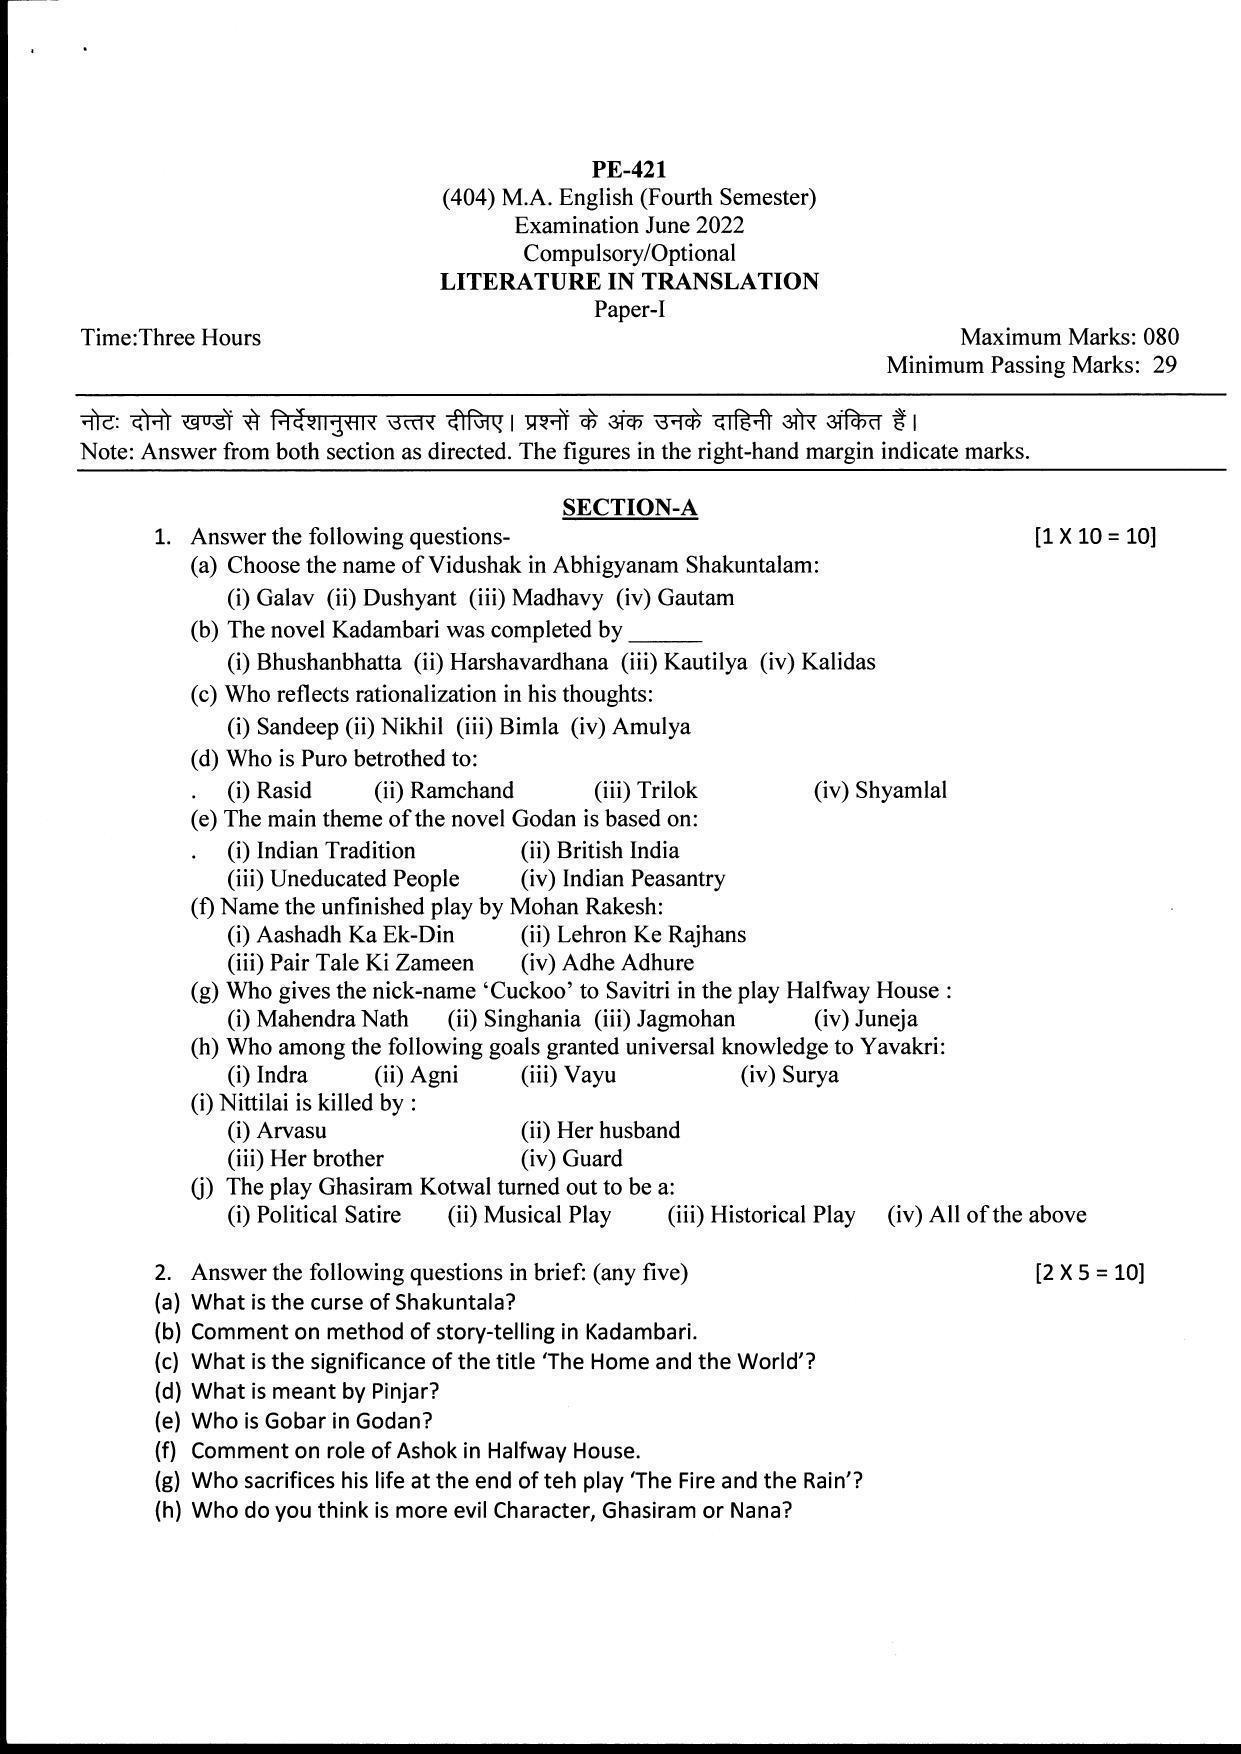 Bilaspur University Question Paper June 2022:M.A. English (Fourth Semester) Literature In Translation paper 1 - Page 1